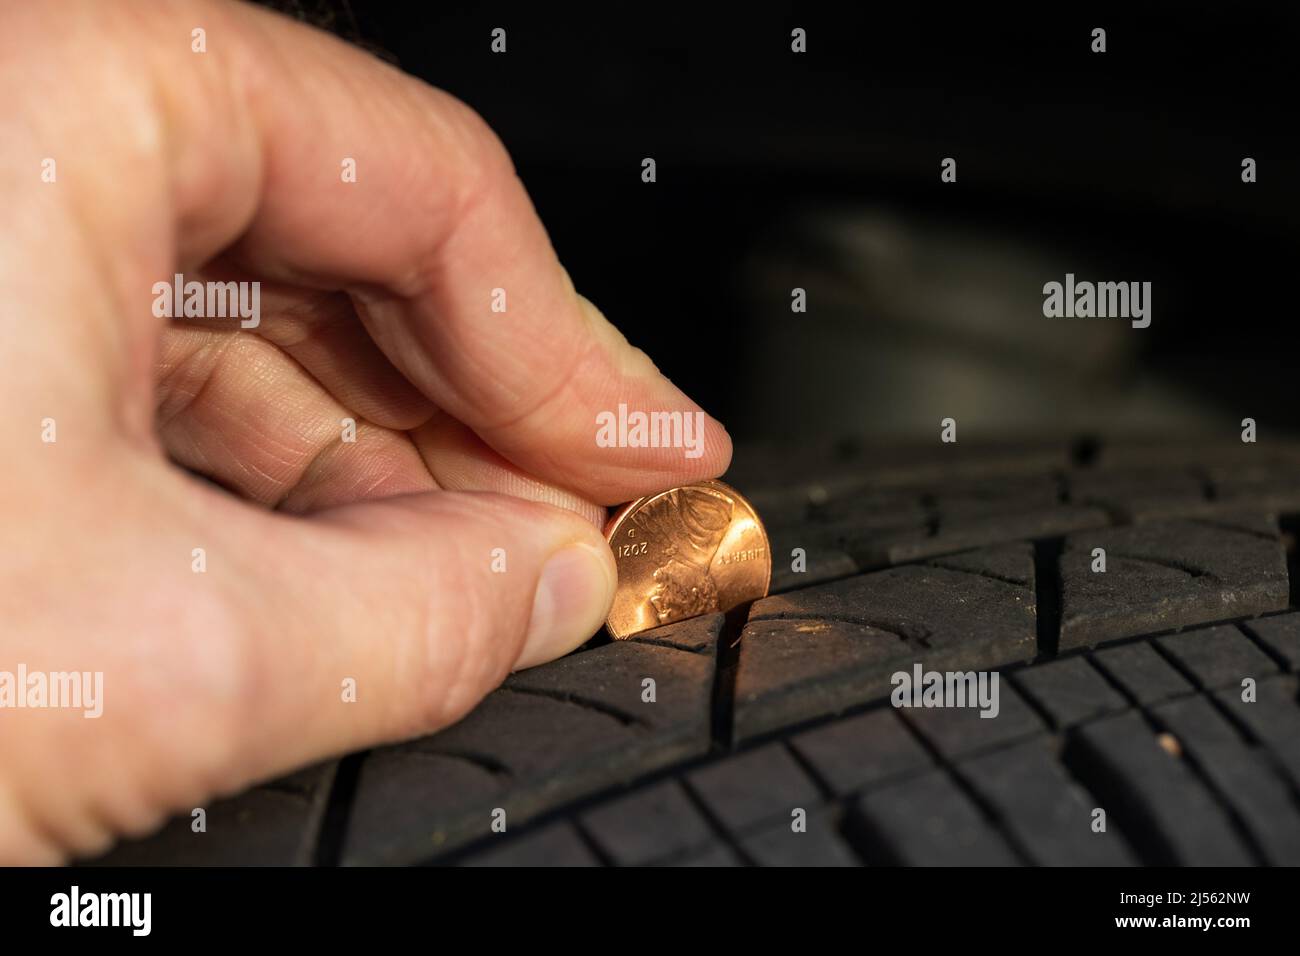 Using a penny to check tread depth on a tire Stock Photo